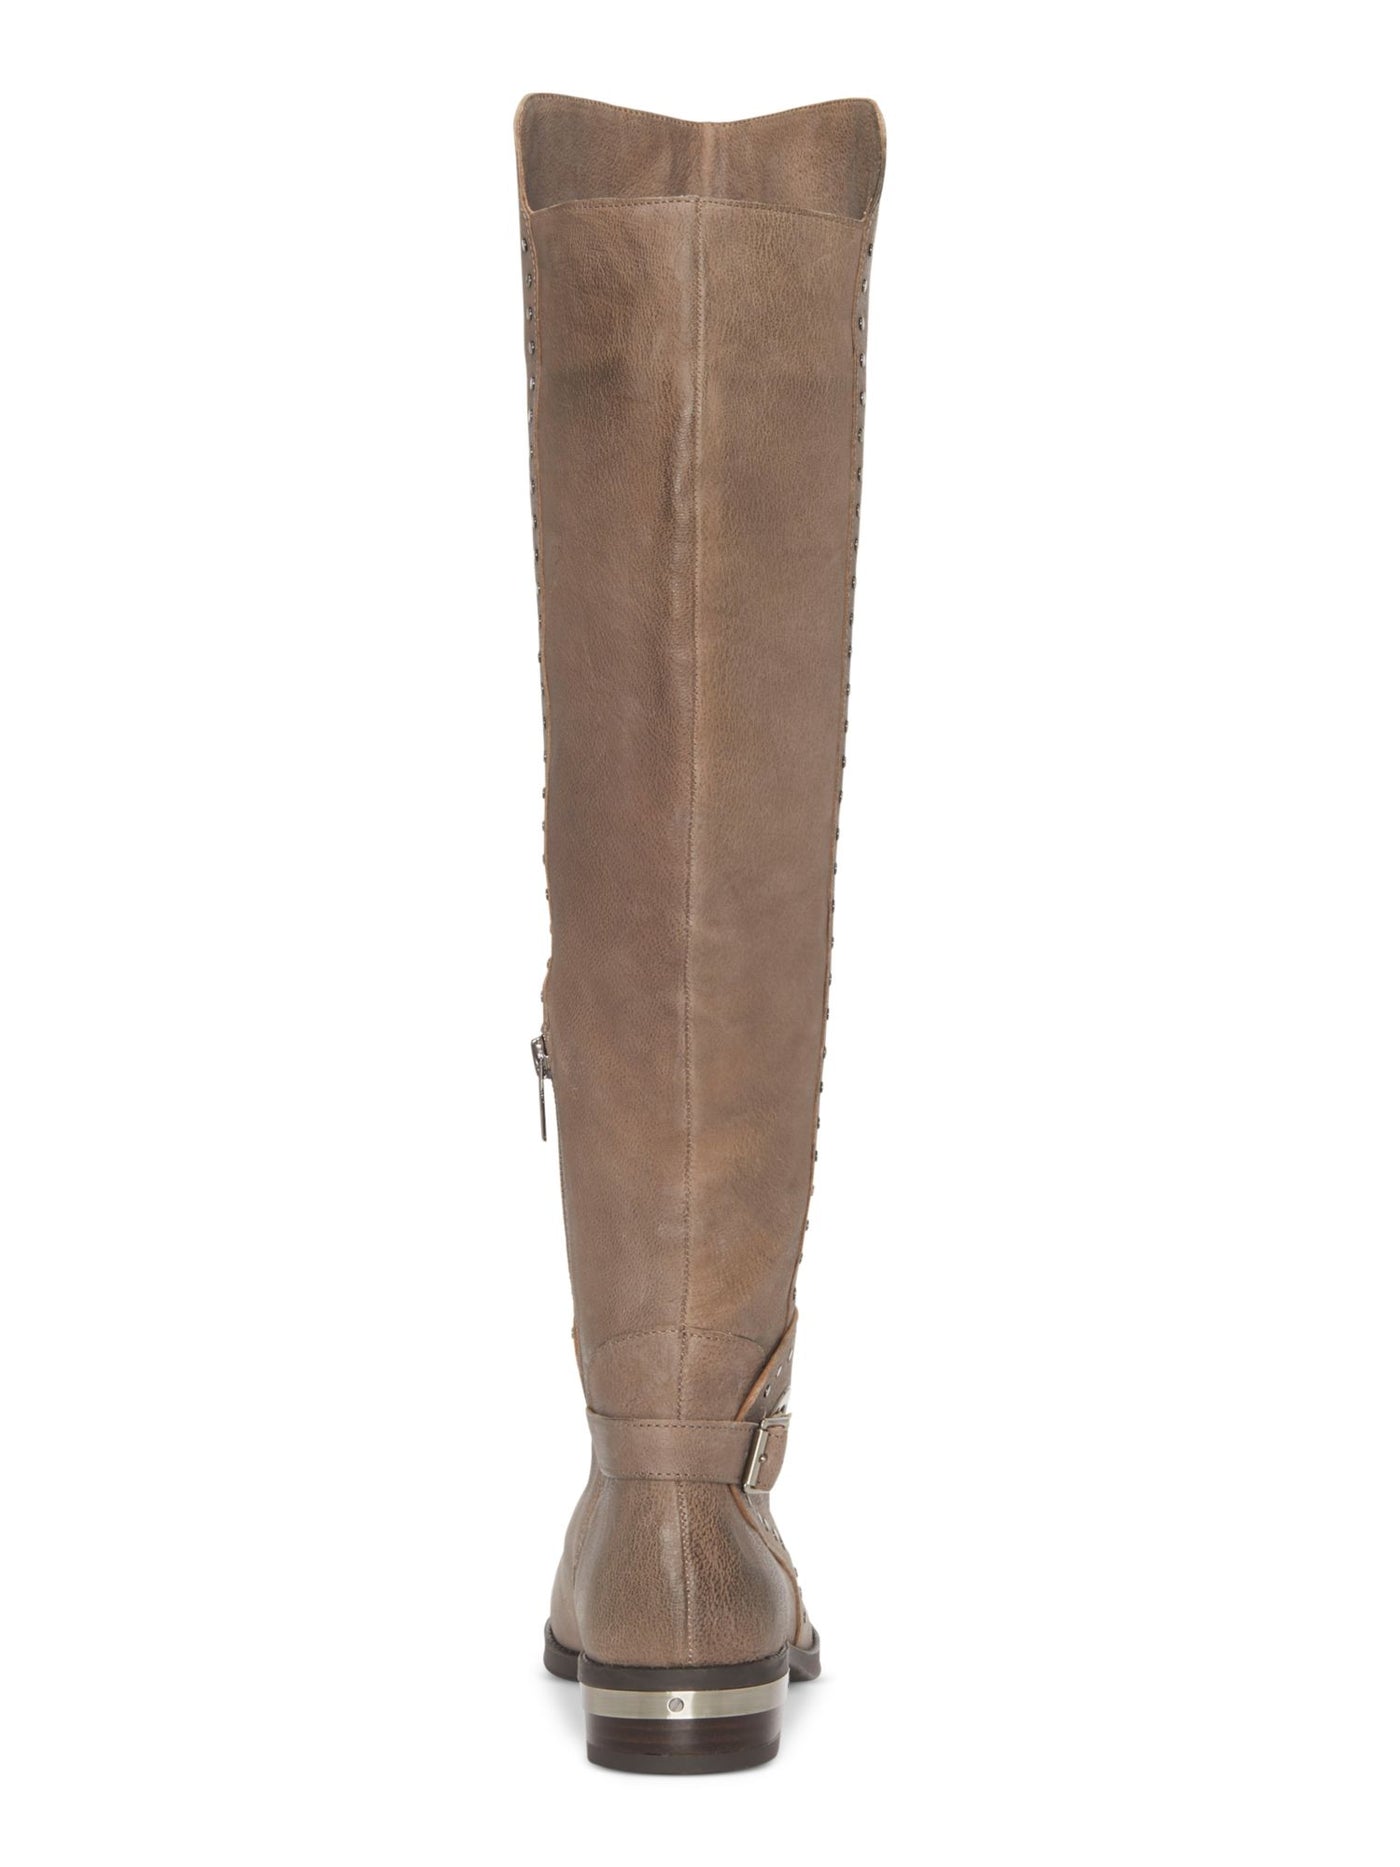 VINCE CAMUTO Womens Beige Heel Accent Cushioned Studded Round Toe Stacked Heel Zip-Up Leather Riding Boot 5